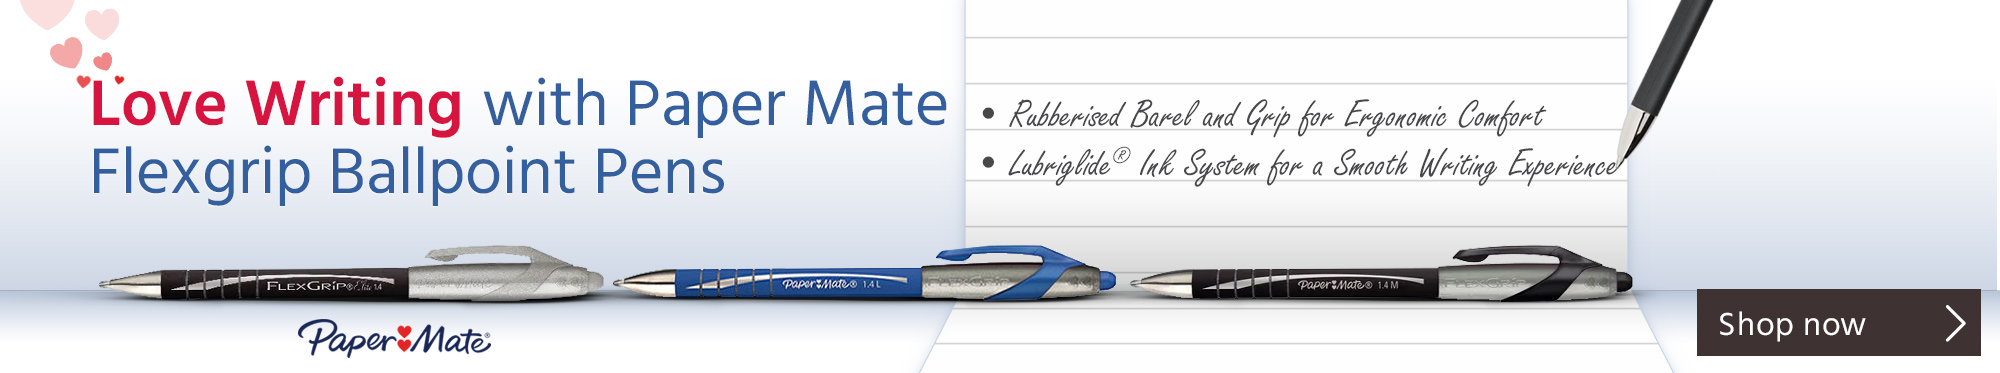 Love Writing with Paper Mate Flexgrip Ballpoint Pens